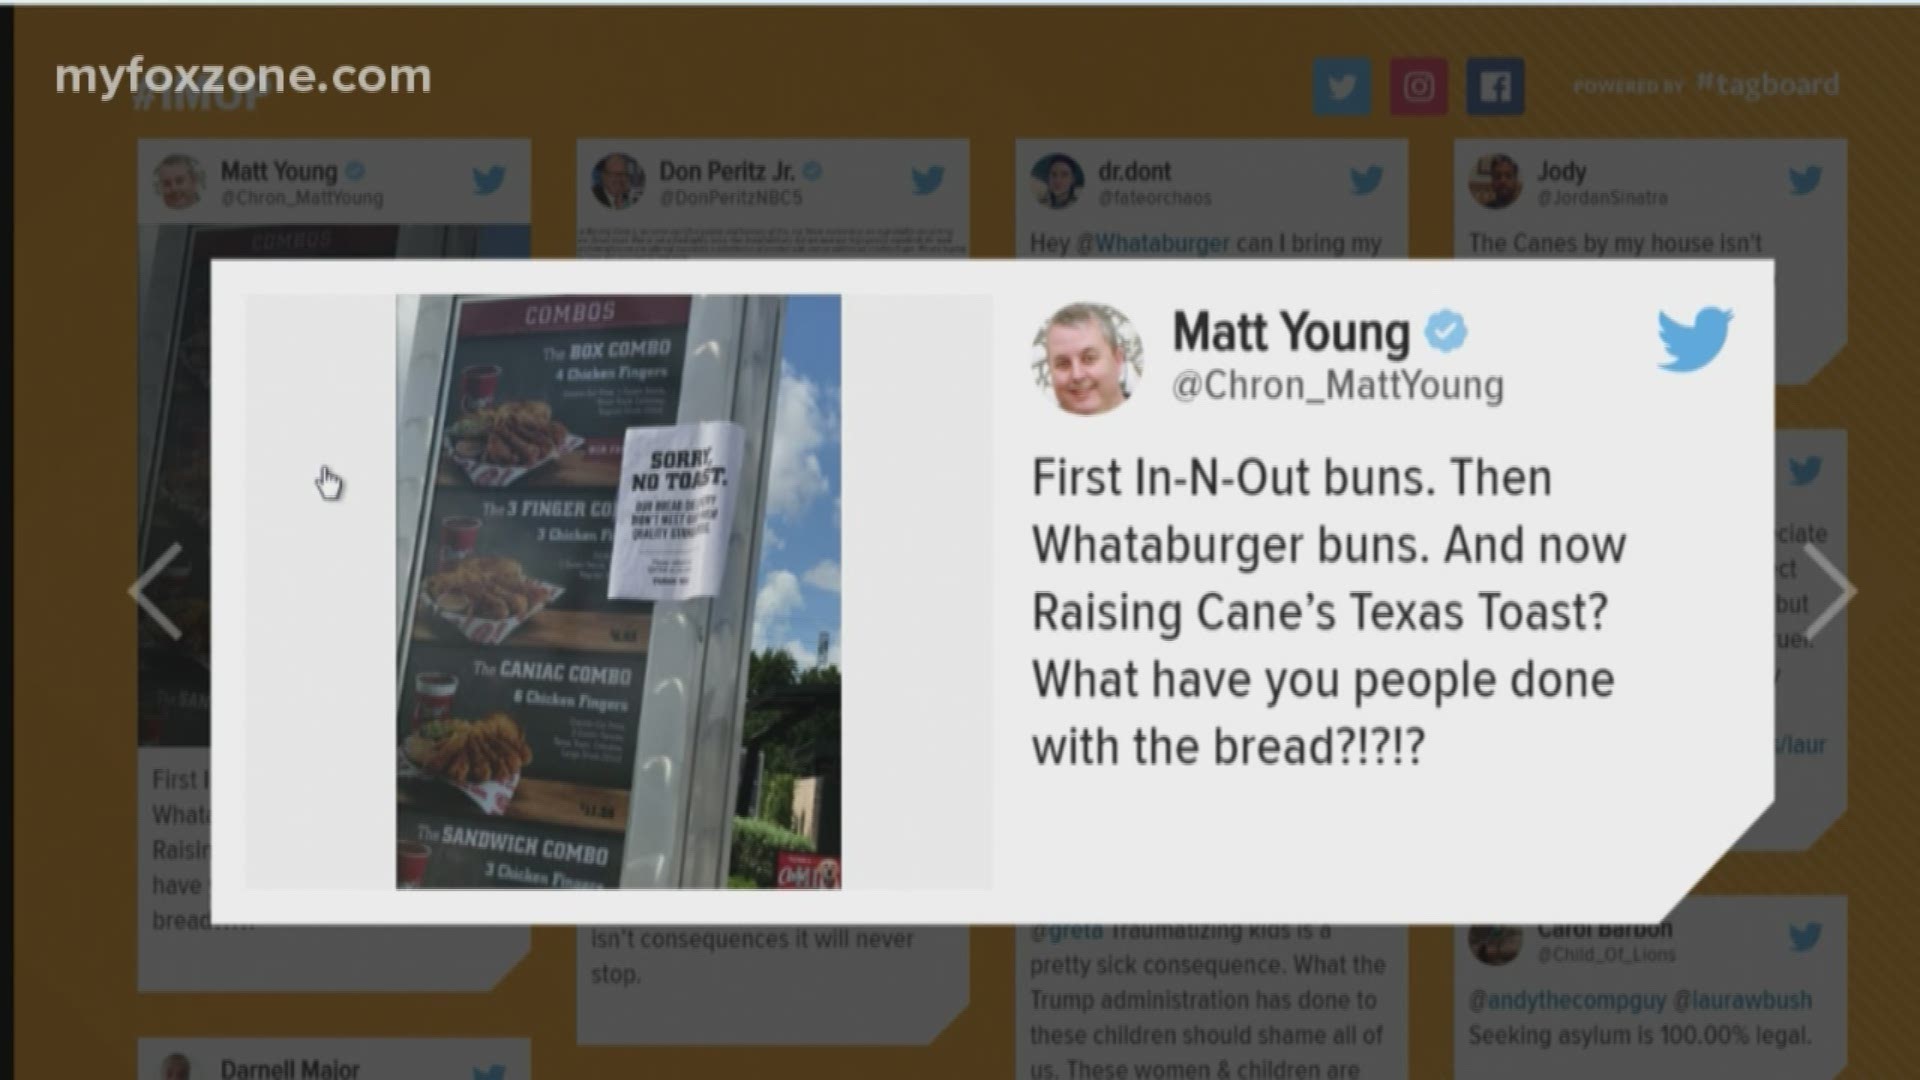 Our Malik Mingo gives you an update on the recent recall of buns from Whataburger and the Texas toast recall from Raising Cane's Chicken Fingers.